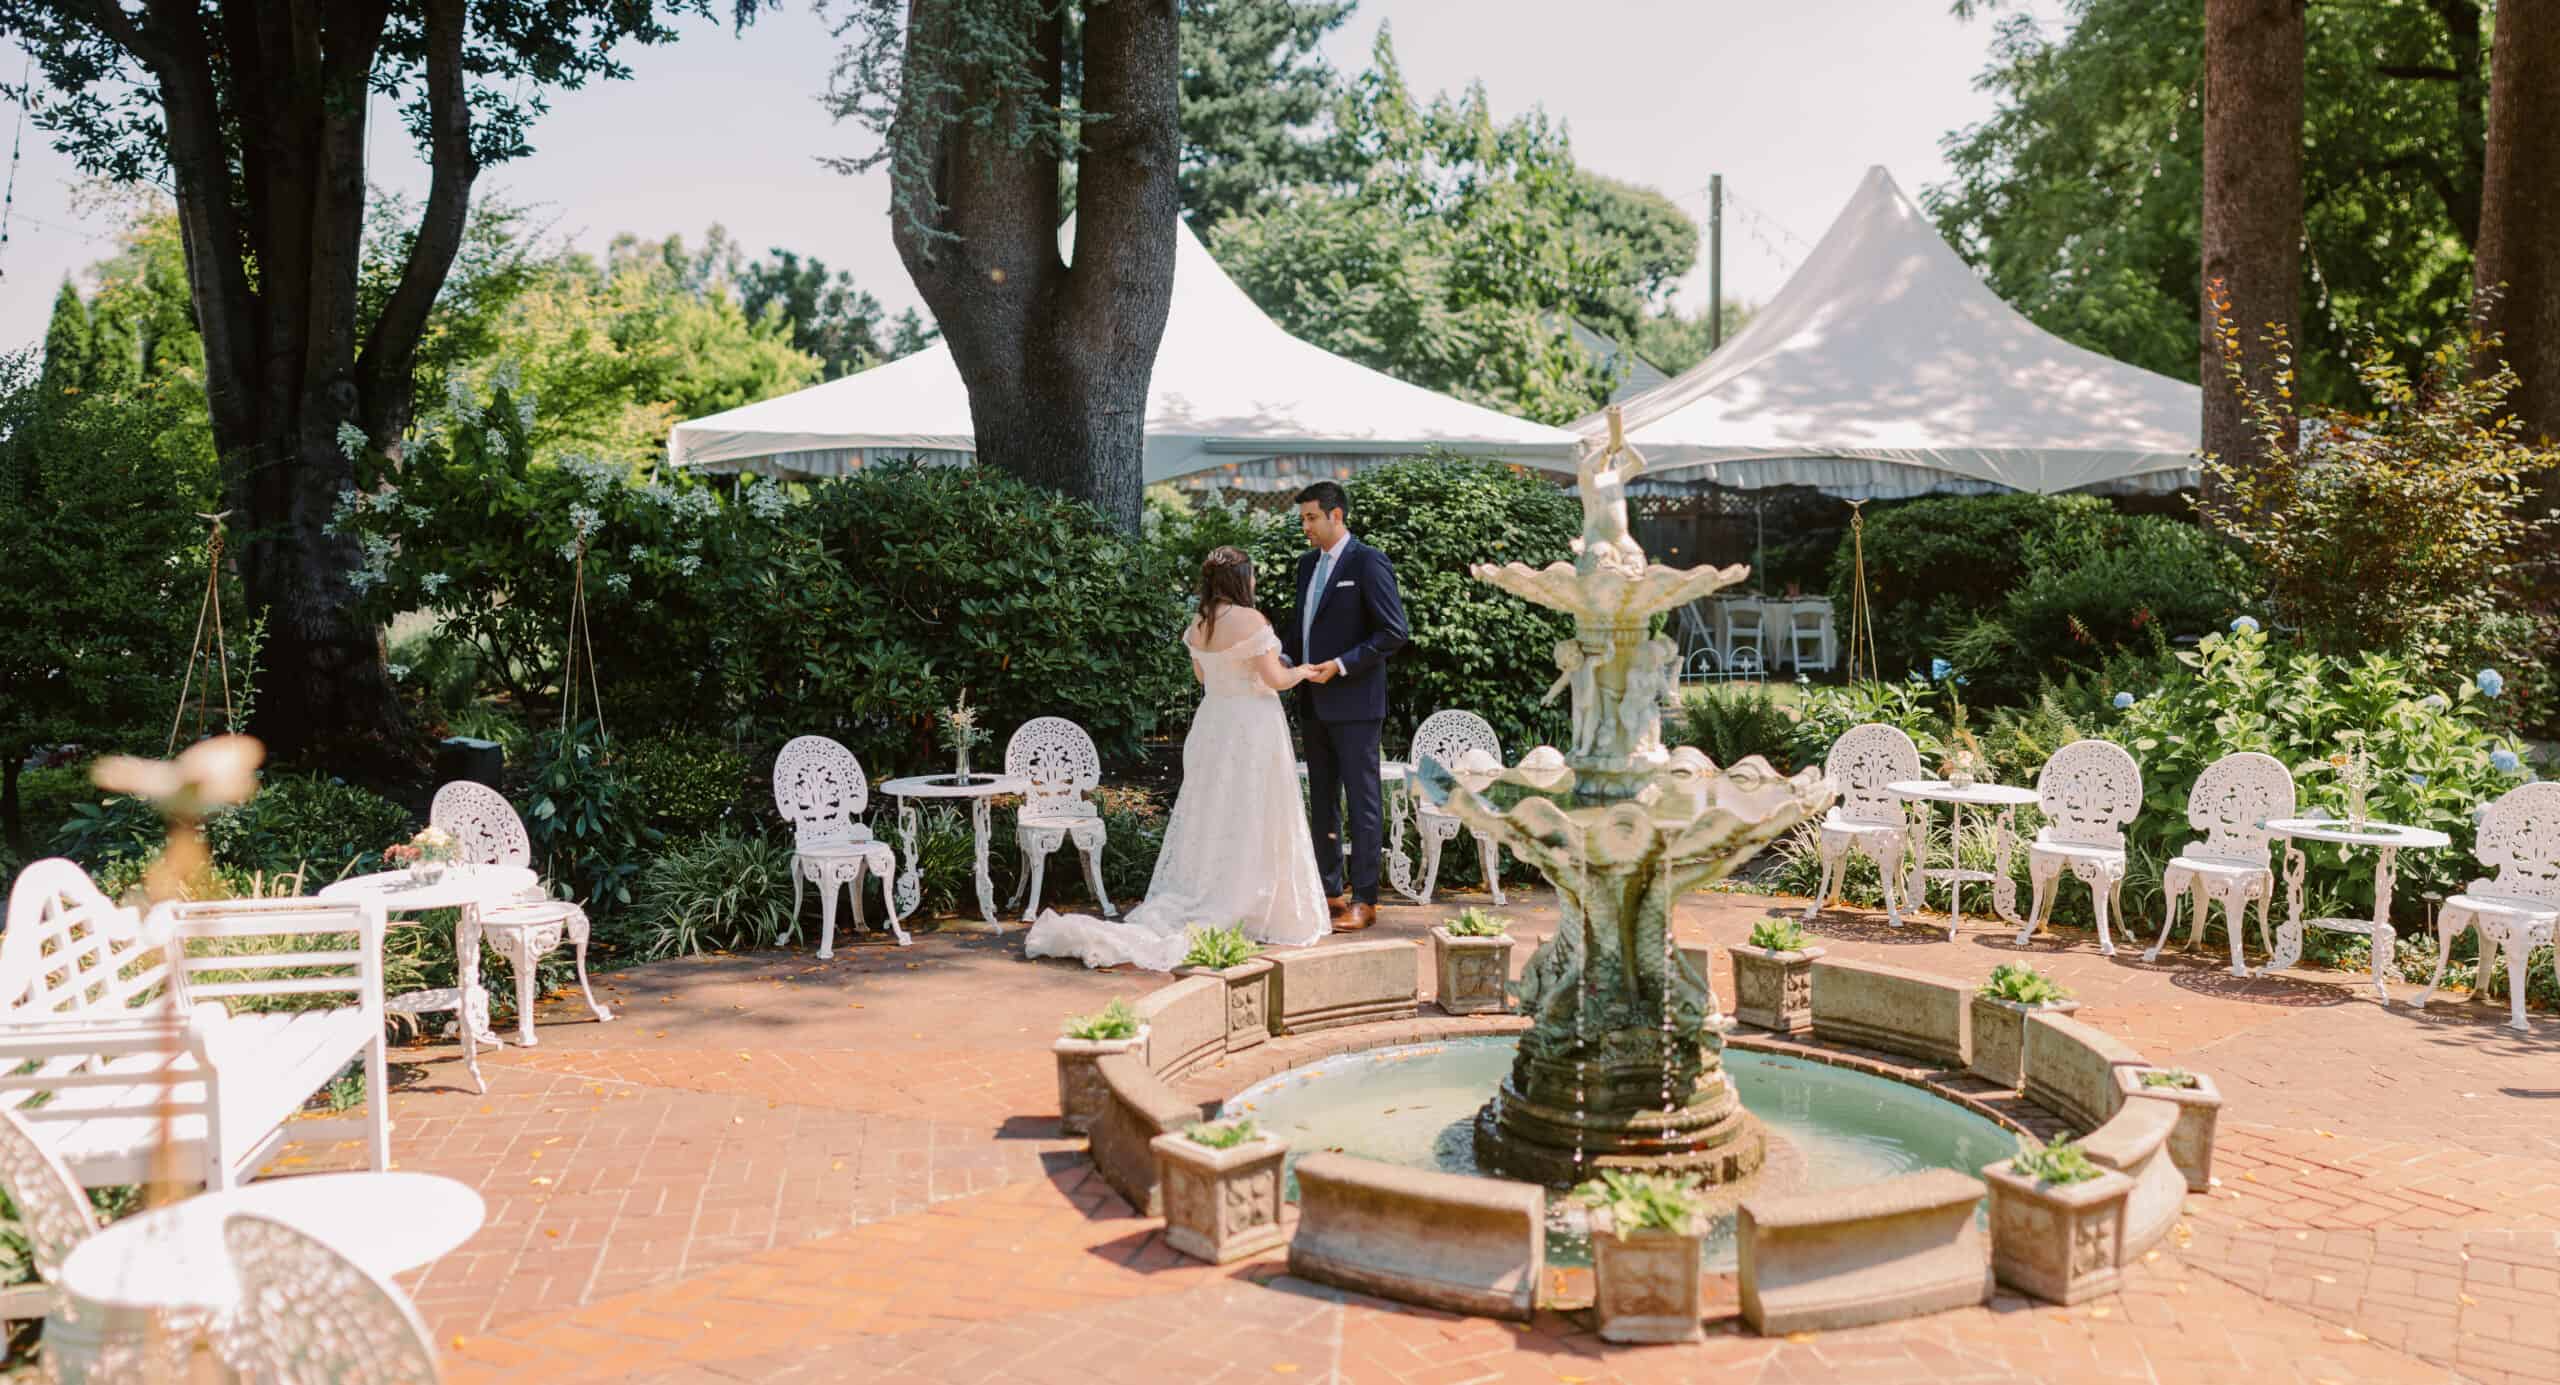 A bride and groom stand together by an antique fountain